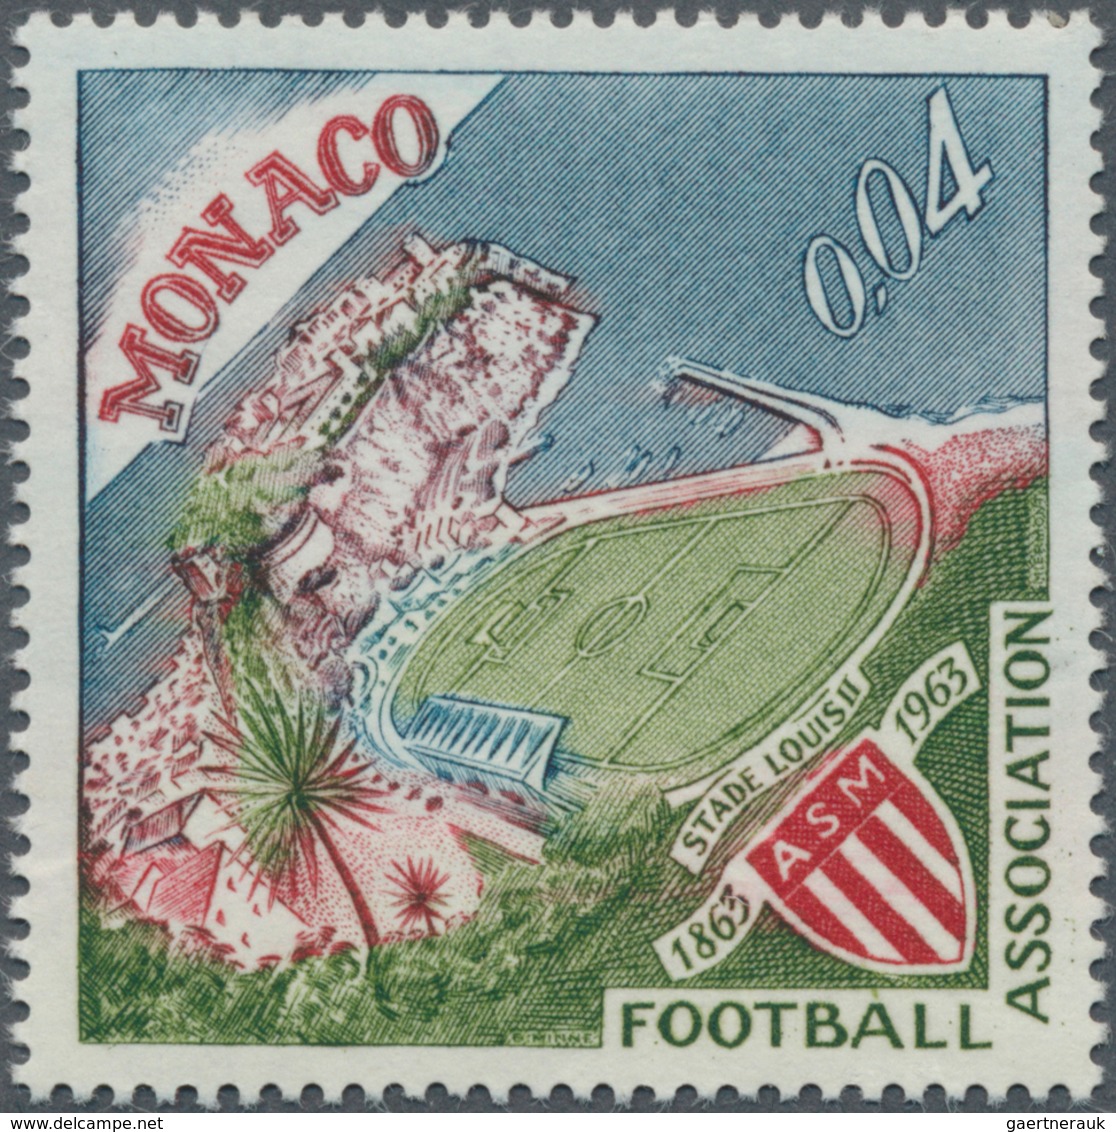 01547 Monaco: 1963, French Champion "AS Monaco", 0.04fr. Without Surcharge, Not Issued, Unmounted Mint, Ce - Ongebruikt